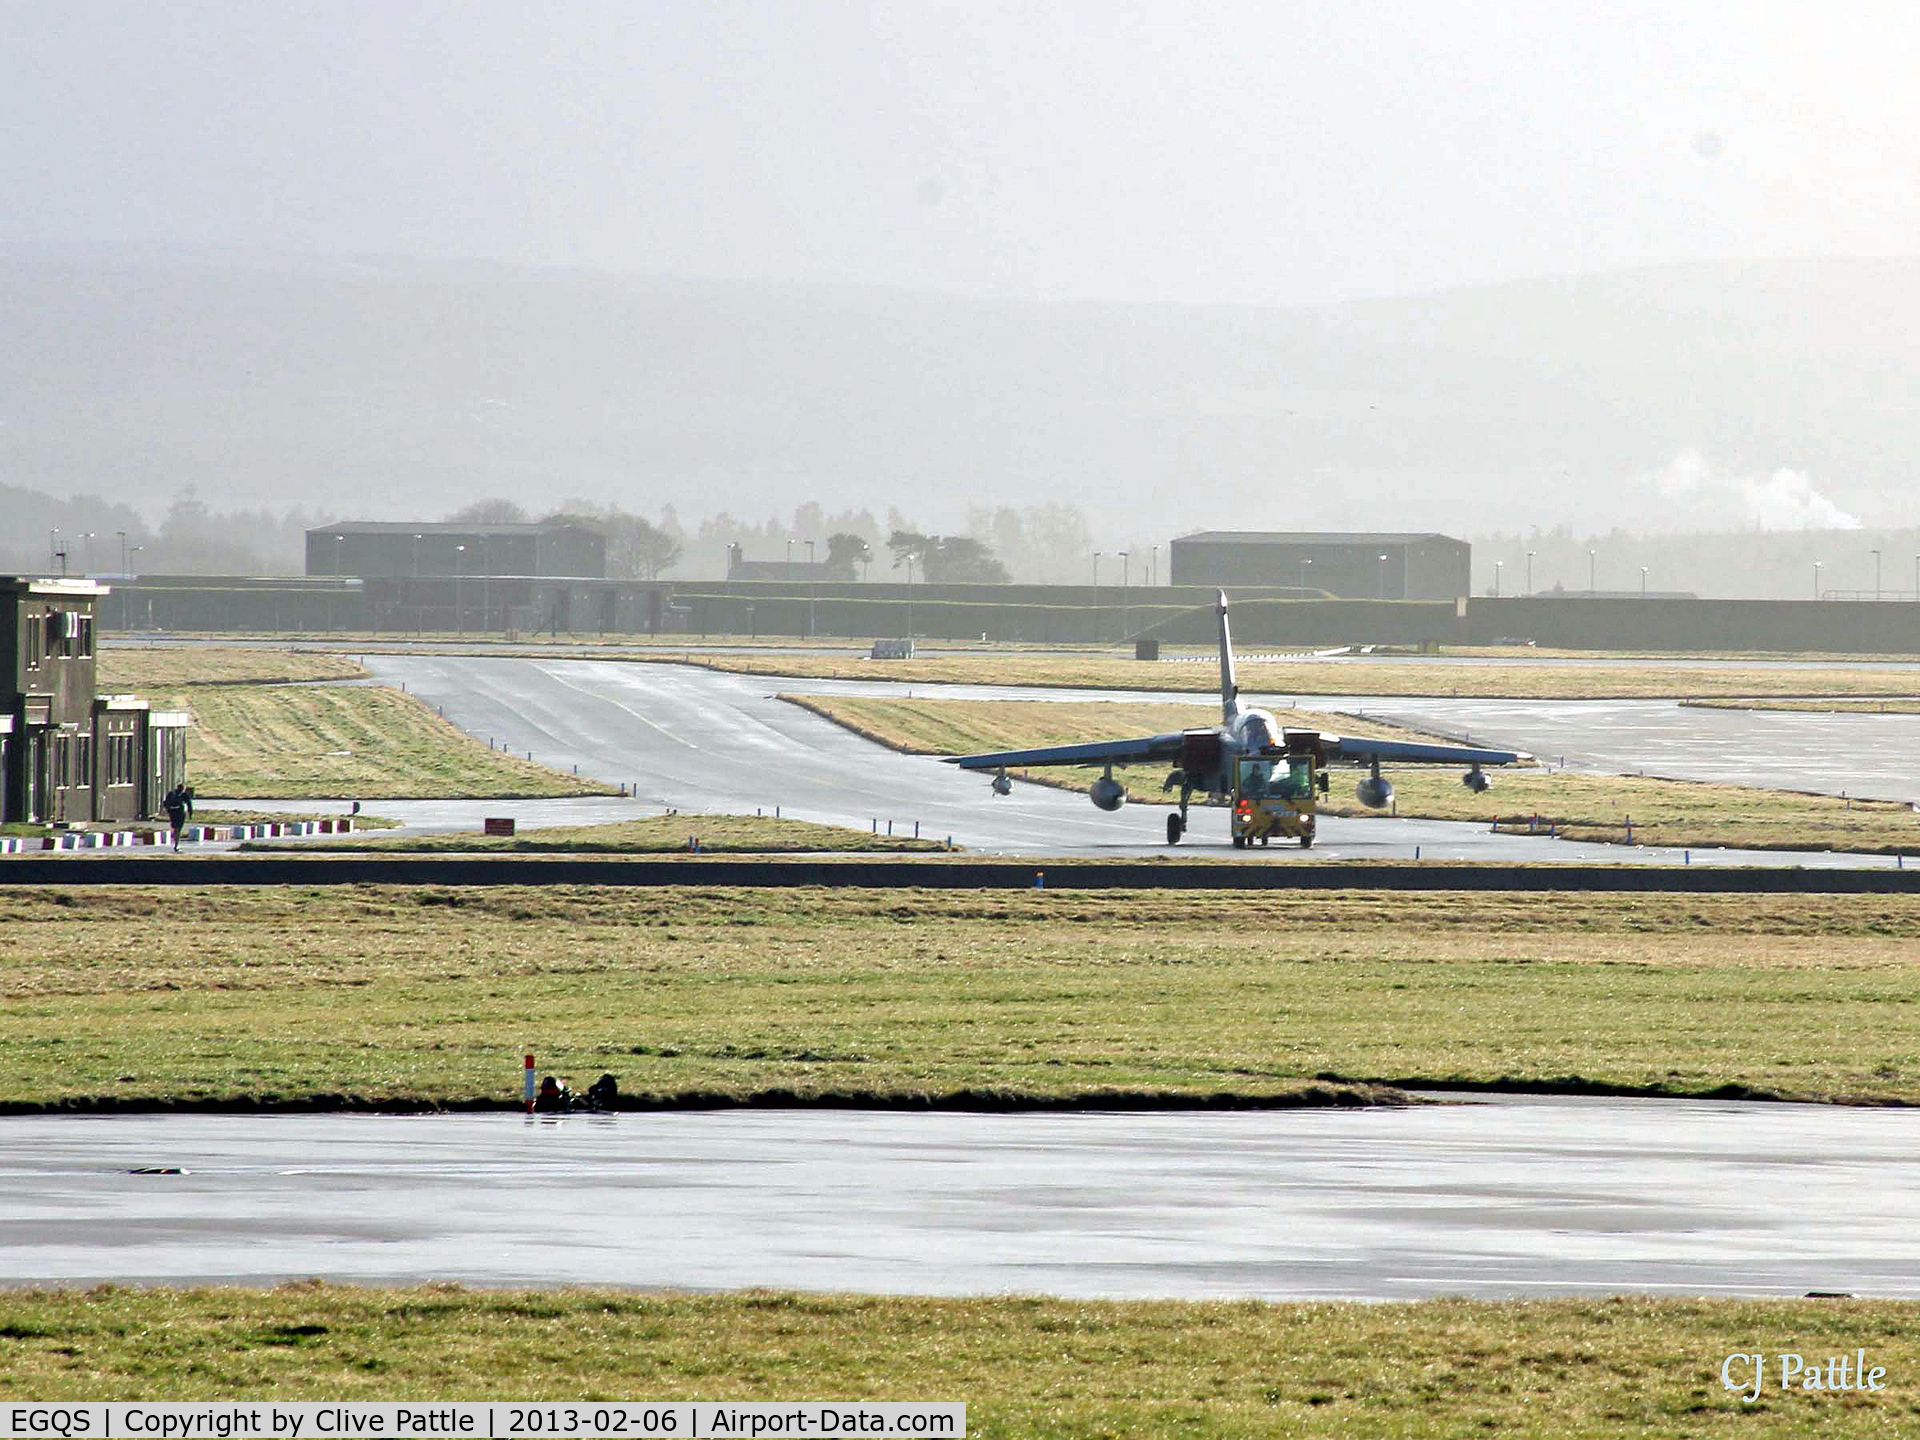 RAF Lossiemouth Airport, Lossiemouth, Scotland United Kingdom (EGQS) - The sunshine after the rain - A Tornado GR4 is towed across the airfield